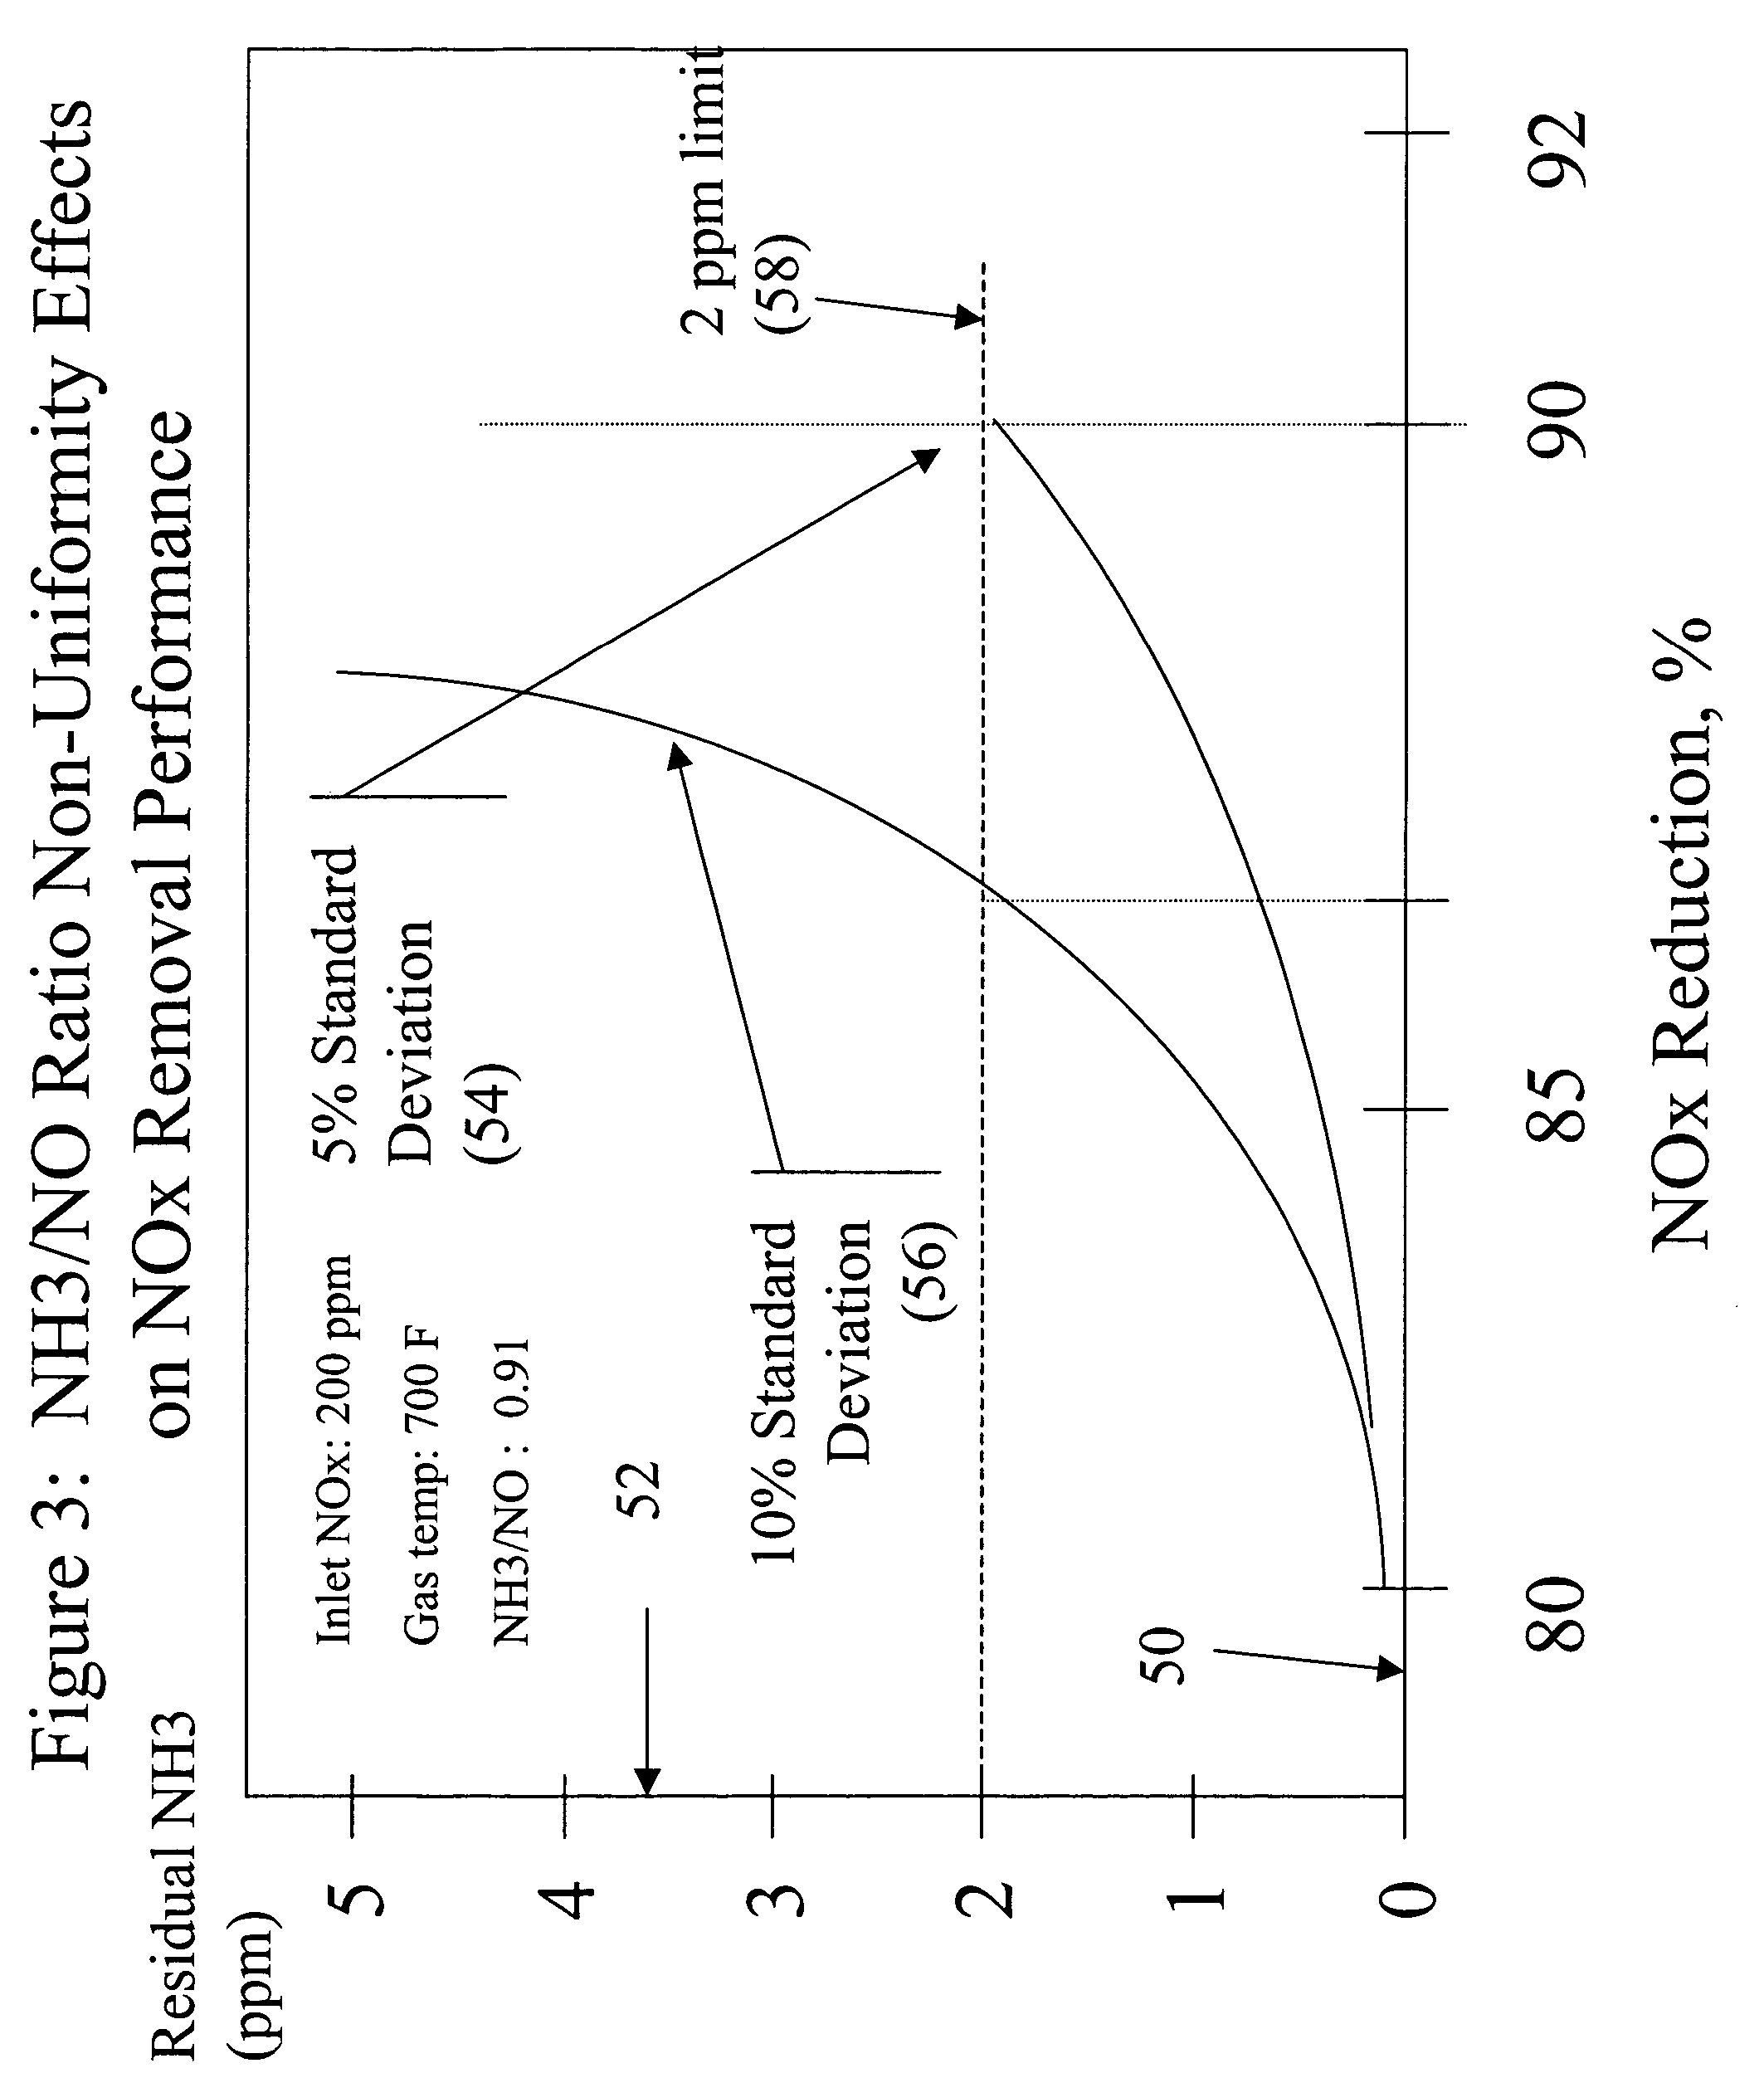 Multi-stage process for SCR of NOx